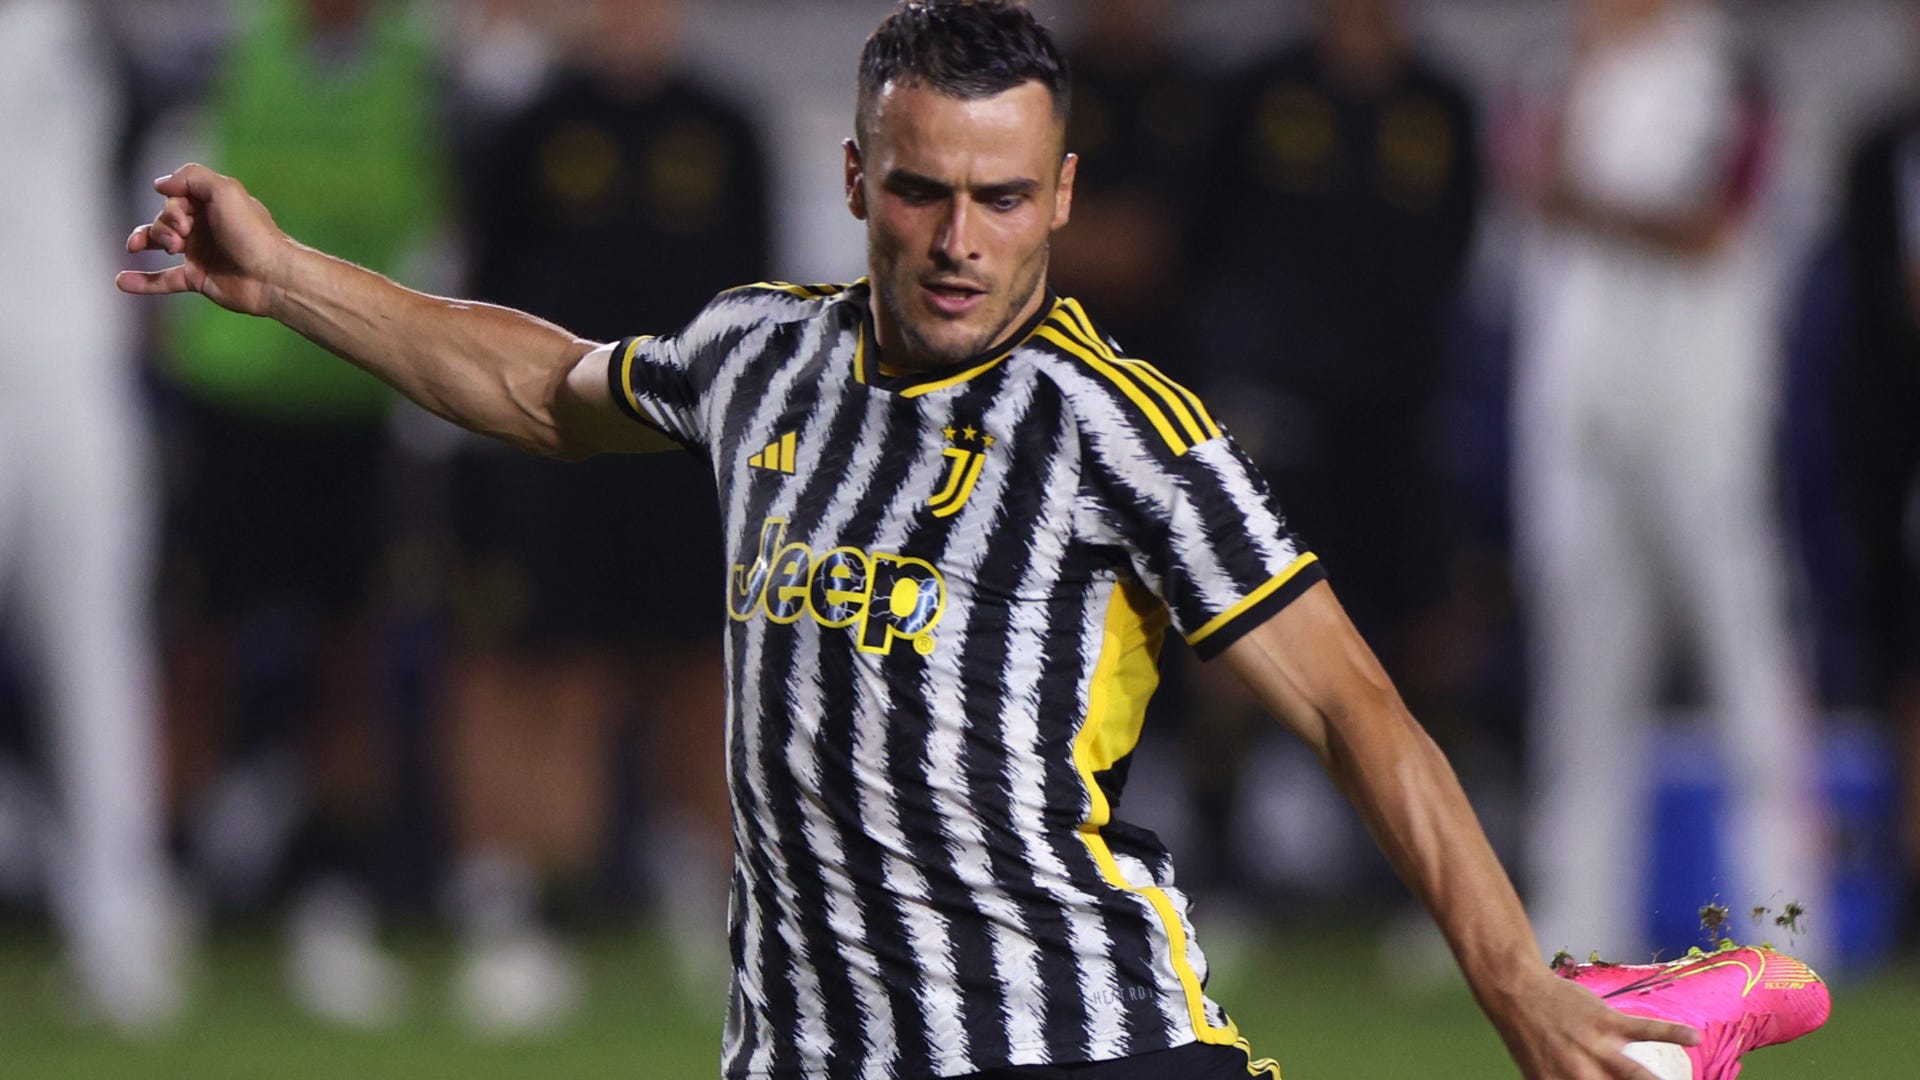 Udinese vs Juventus Where to watch the match online, live stream, TV channels, and kick-off time Goal US